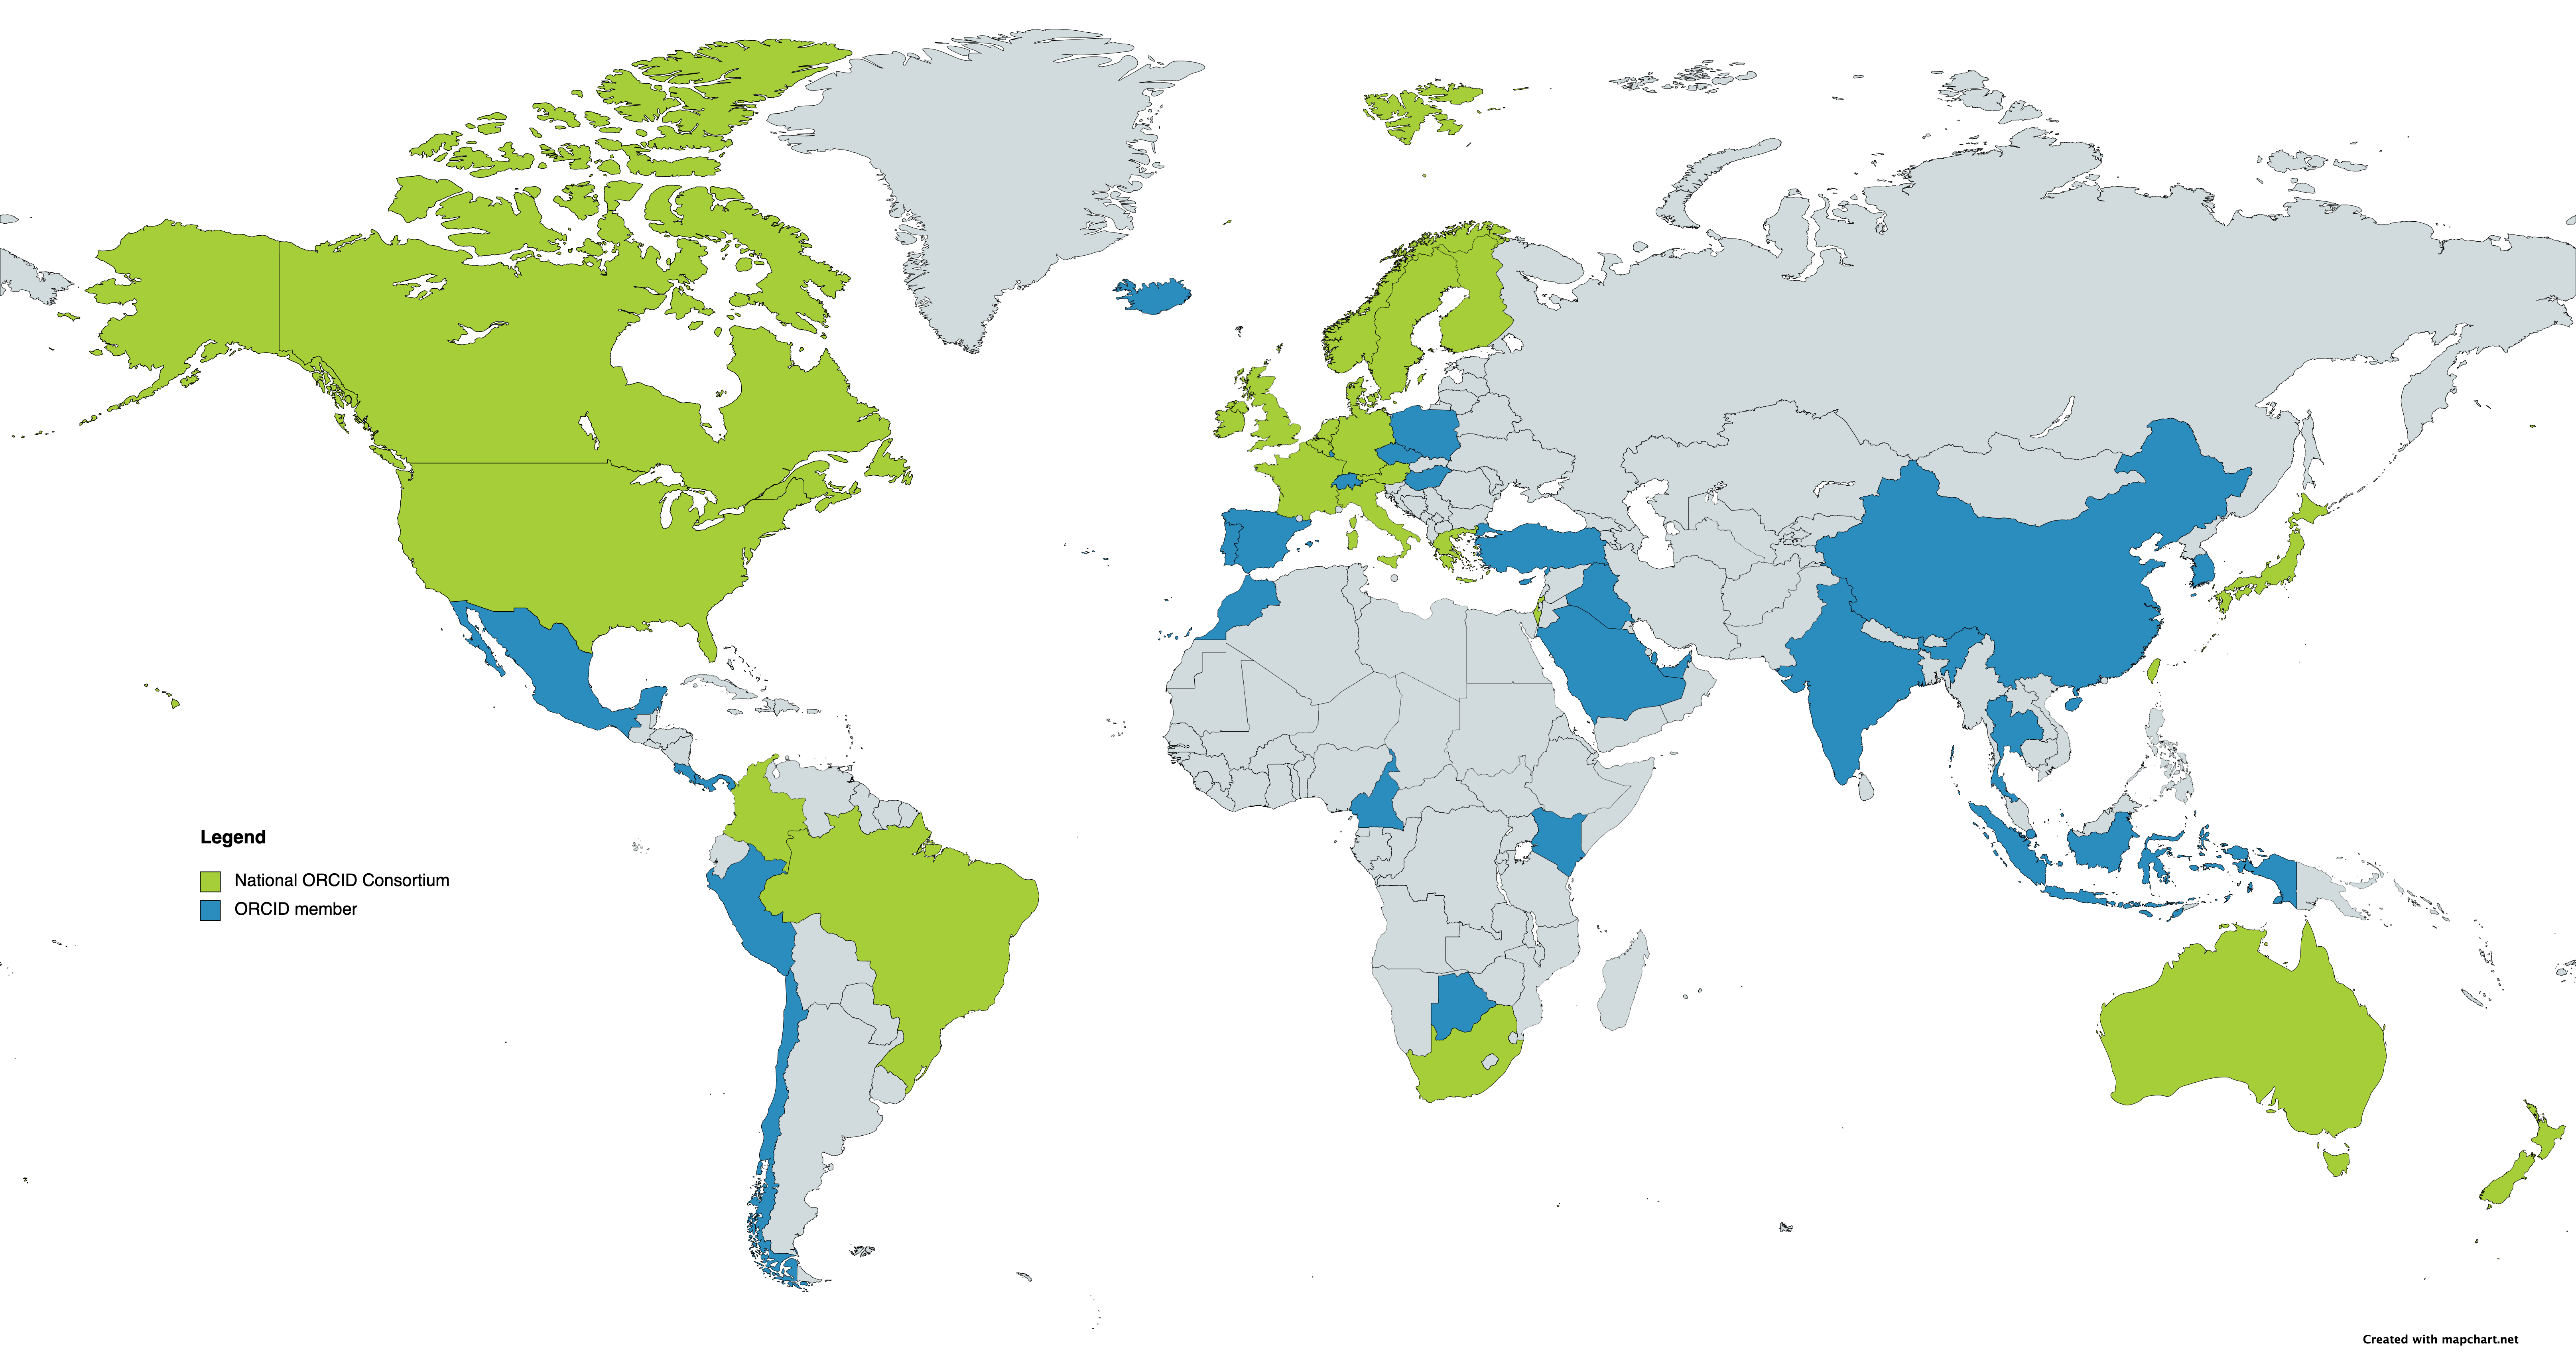 world map showing areas of ORCID membership. Green indicates Consortia and Blue indicates direct members.